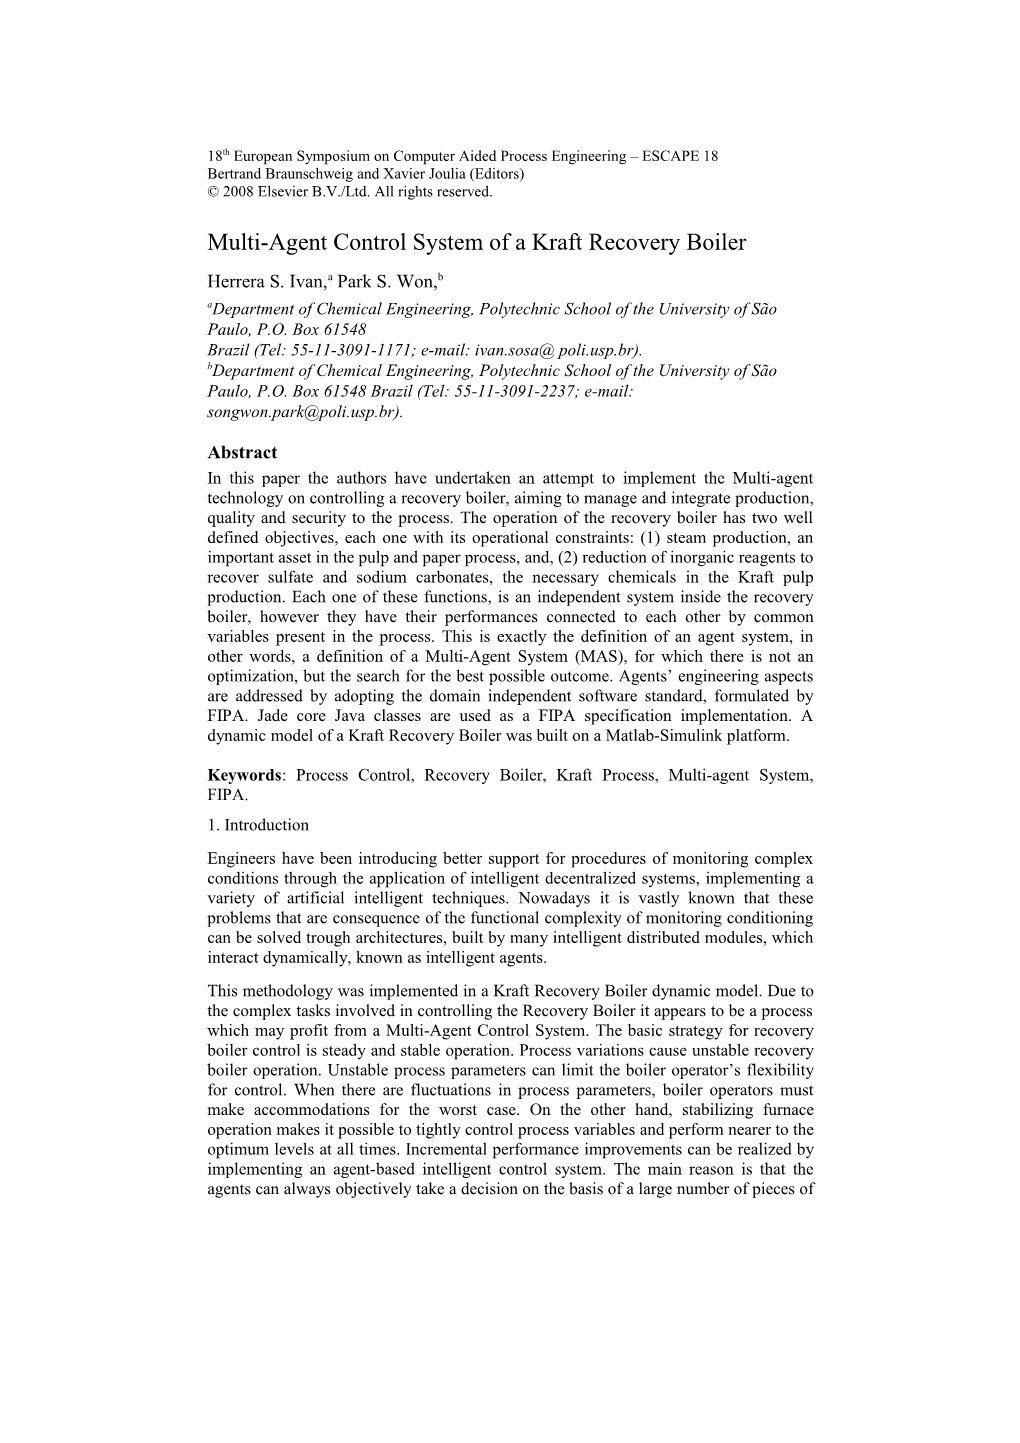 Multi-Agent Control System of a Kraft Recovery Boiler 3